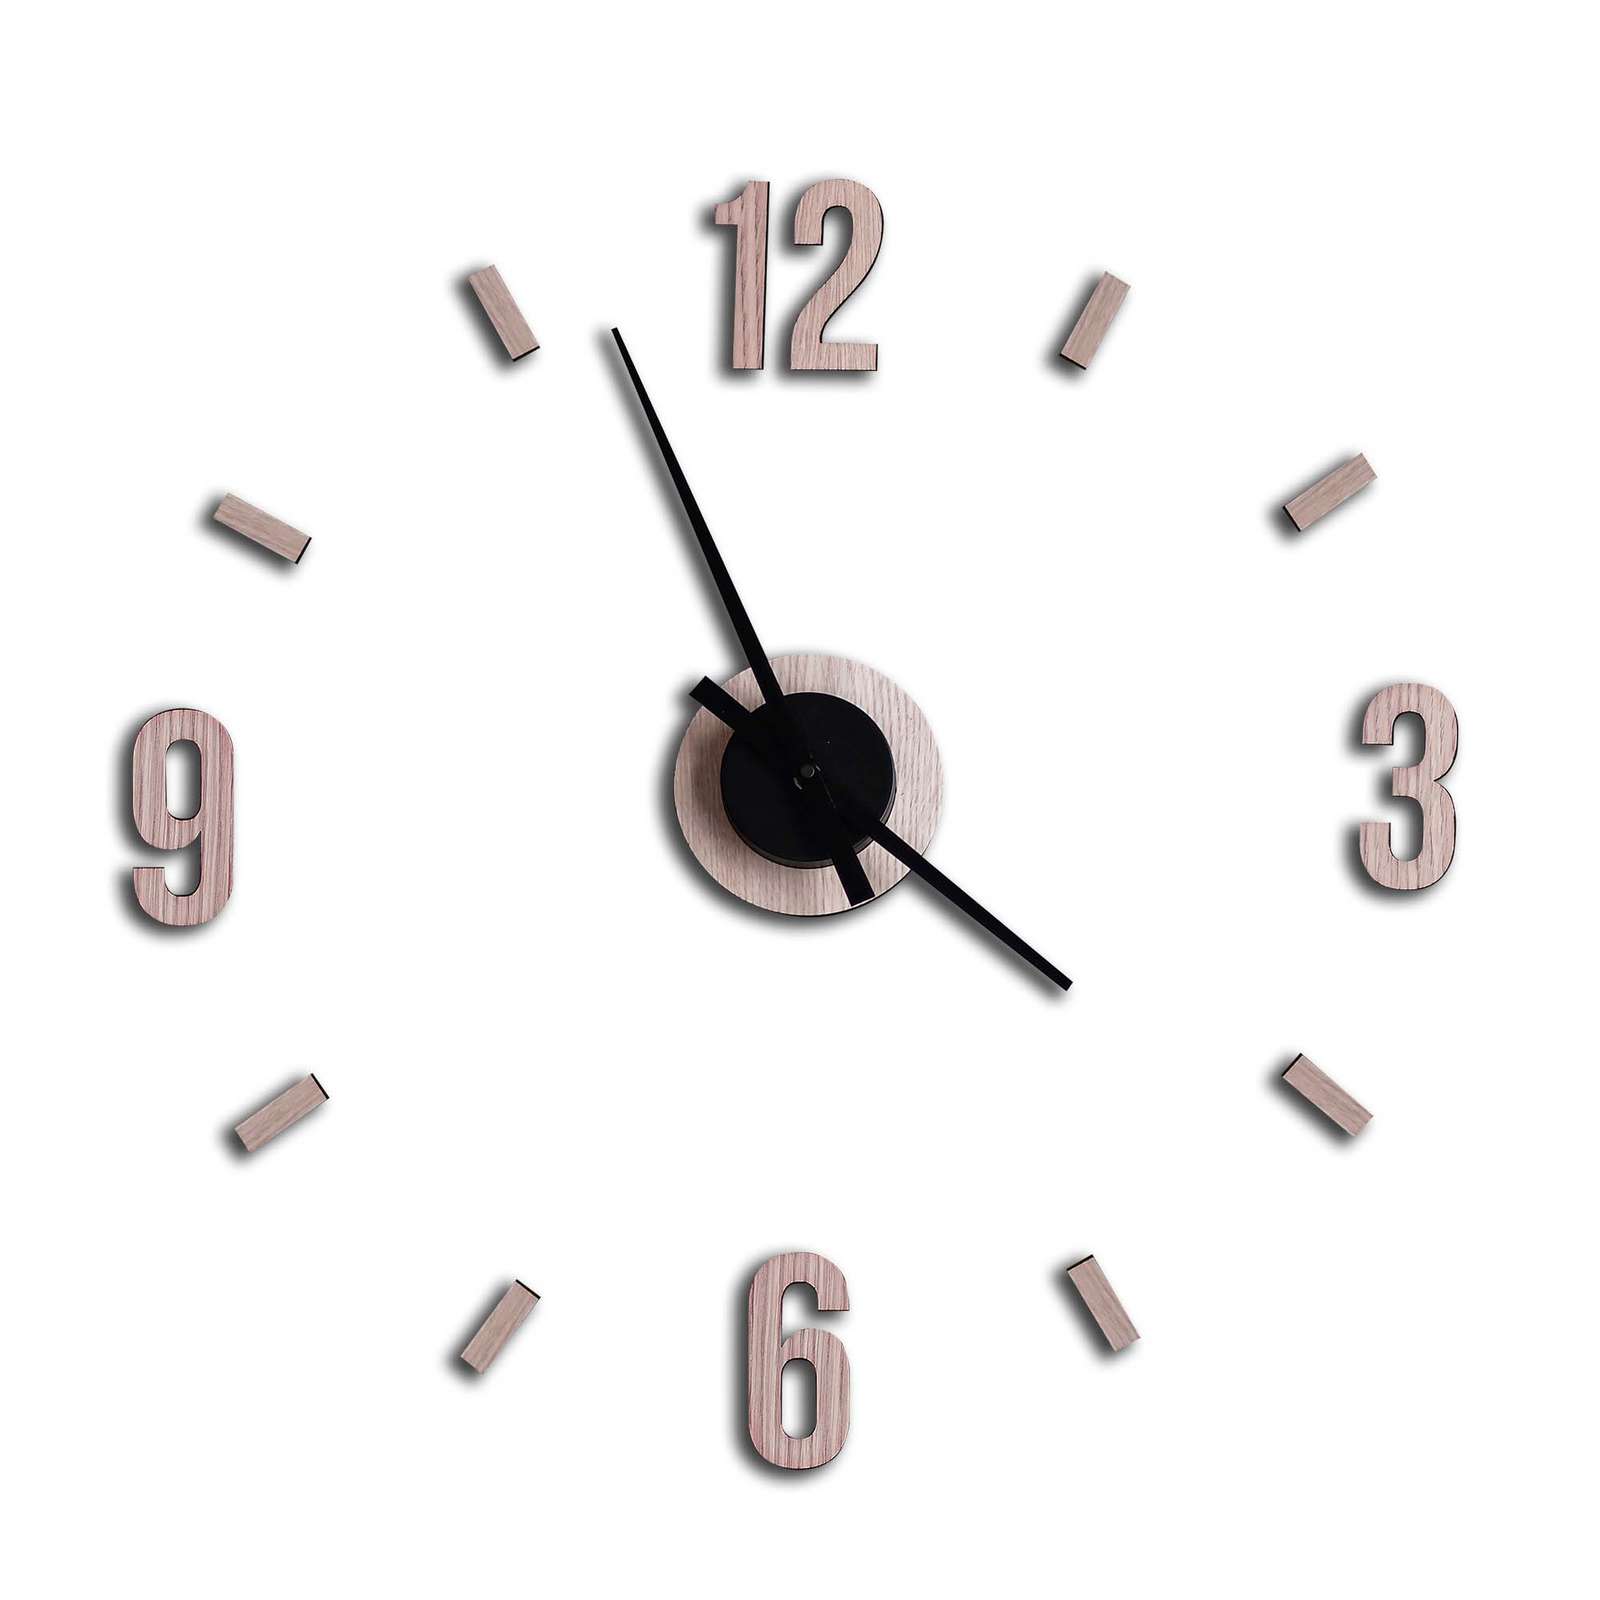 Minifabrikken - Wall clock with numbers and lines - Light Oak/Black (94064)